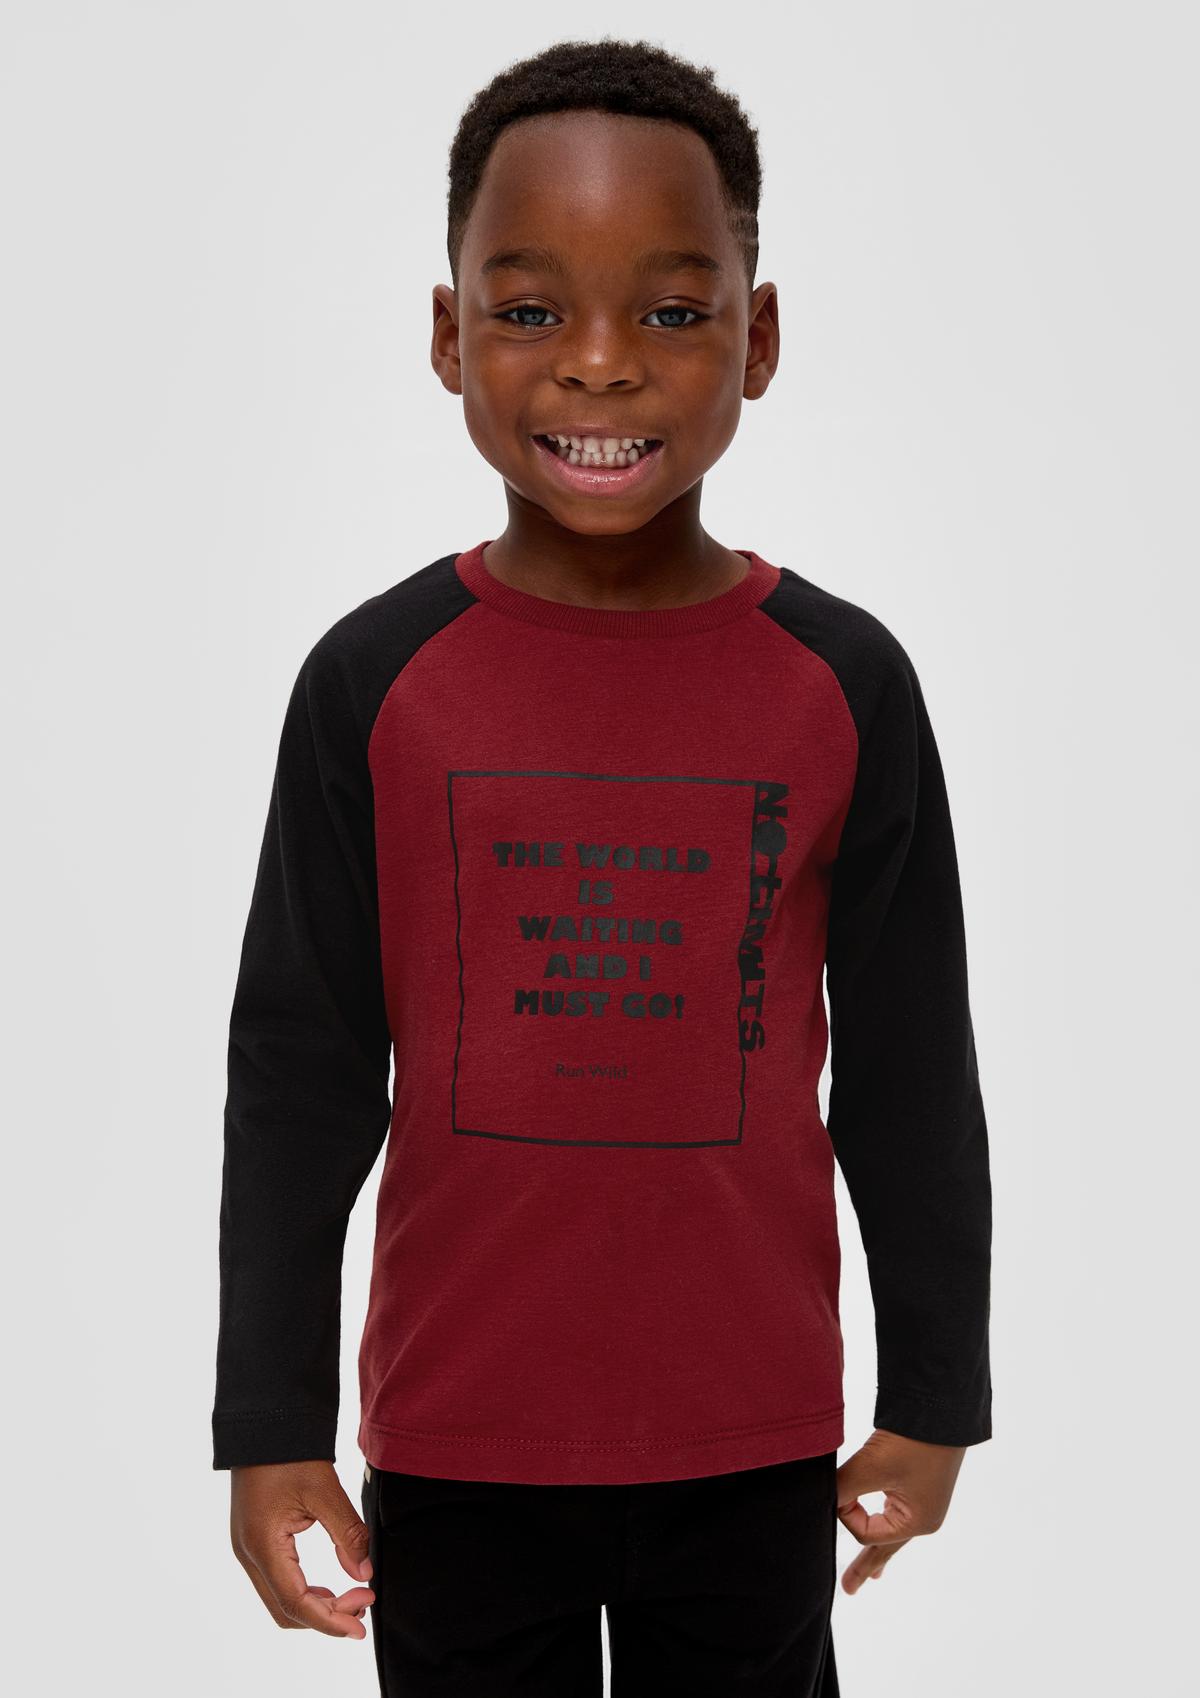 Kids' fashion and clothing for boys and teens